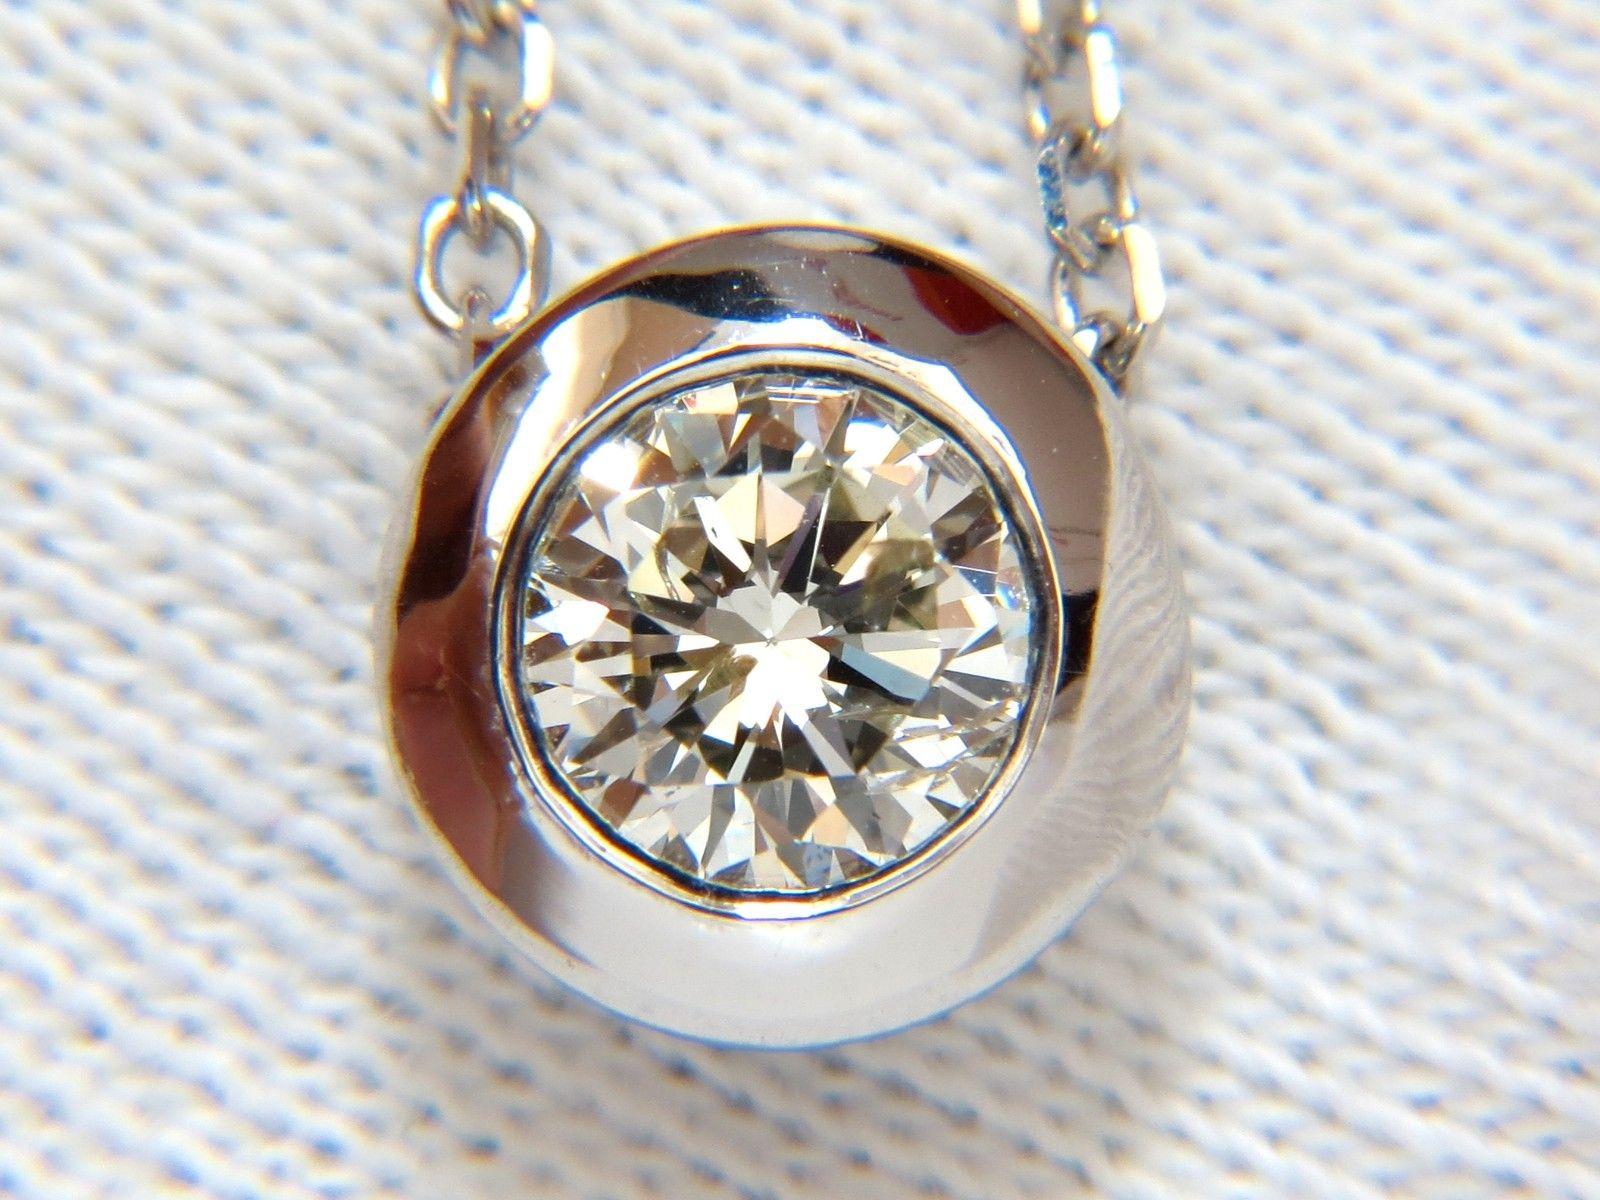 Classic Bezel Solitaire

.75ct. Round diamond

Best Sparkle

Very Good Cut

Si-1 clarity J-color

5.6mm diameter

14kt. white gold

Pendant Measures: 

9.30mm in diameter



14kt 18'' Necklace is included

$5000 appraisal will accompany